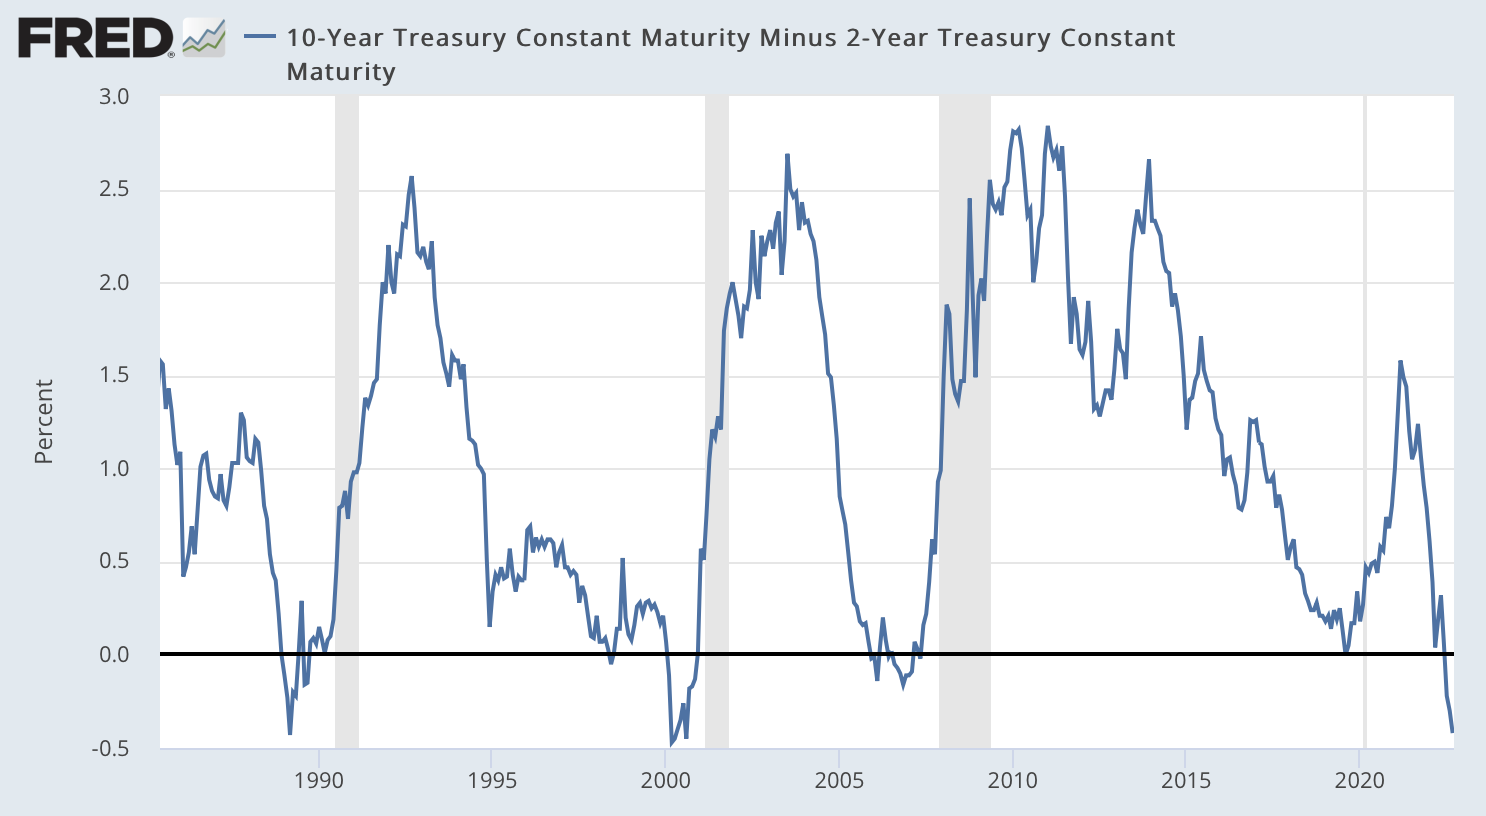 A recession is coming based on yield curve inversion